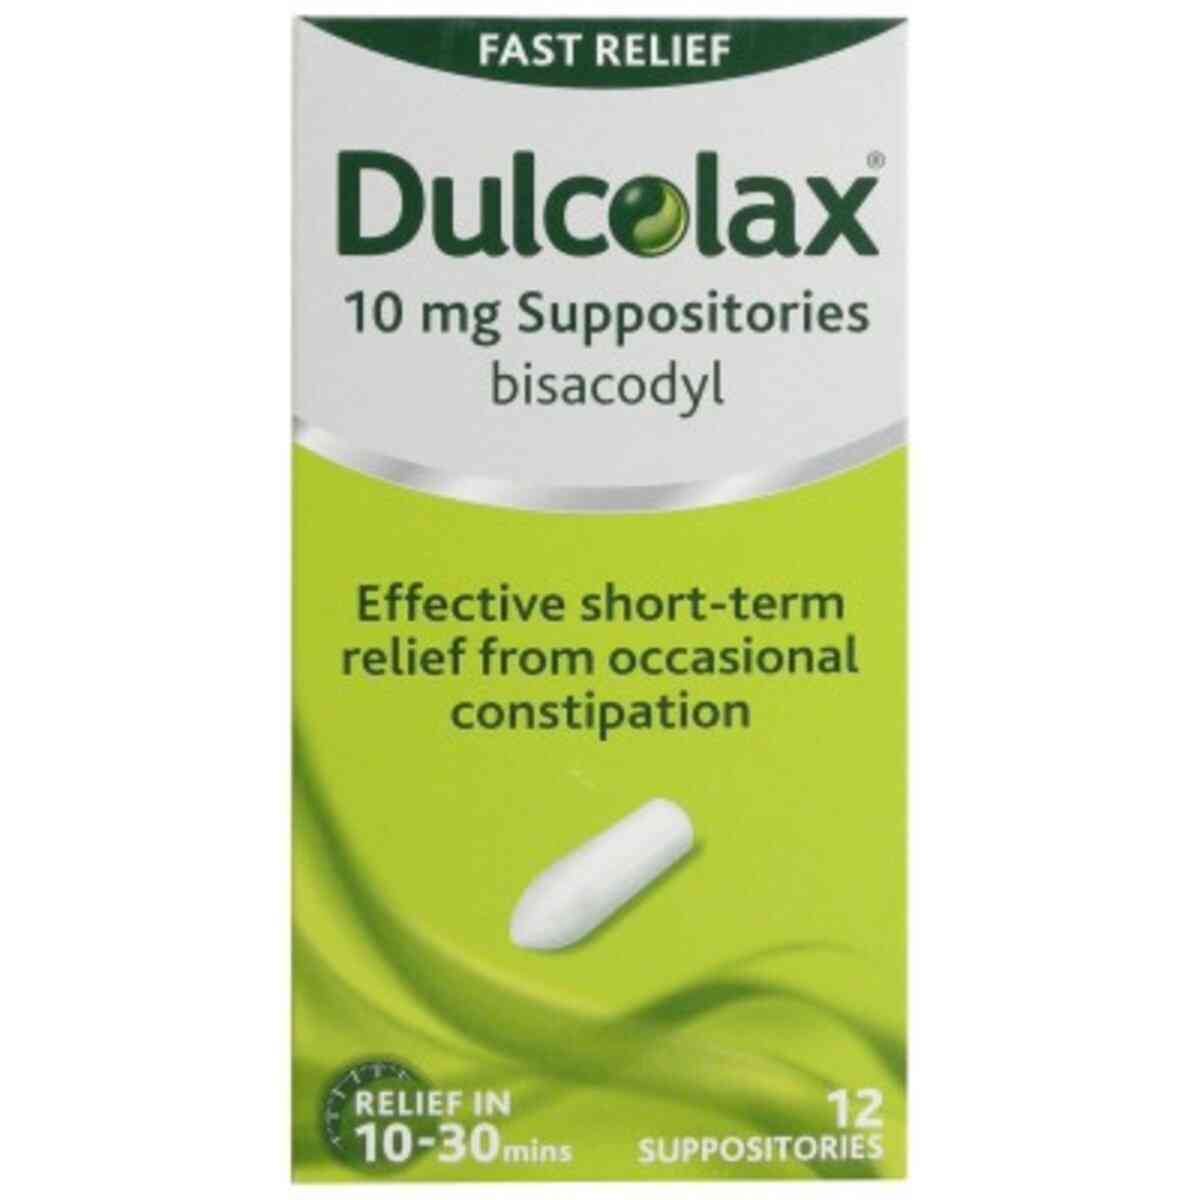 Dulcolax Suppositories Adult Laxatives 10mg Bisacodyl 6 Suppositories